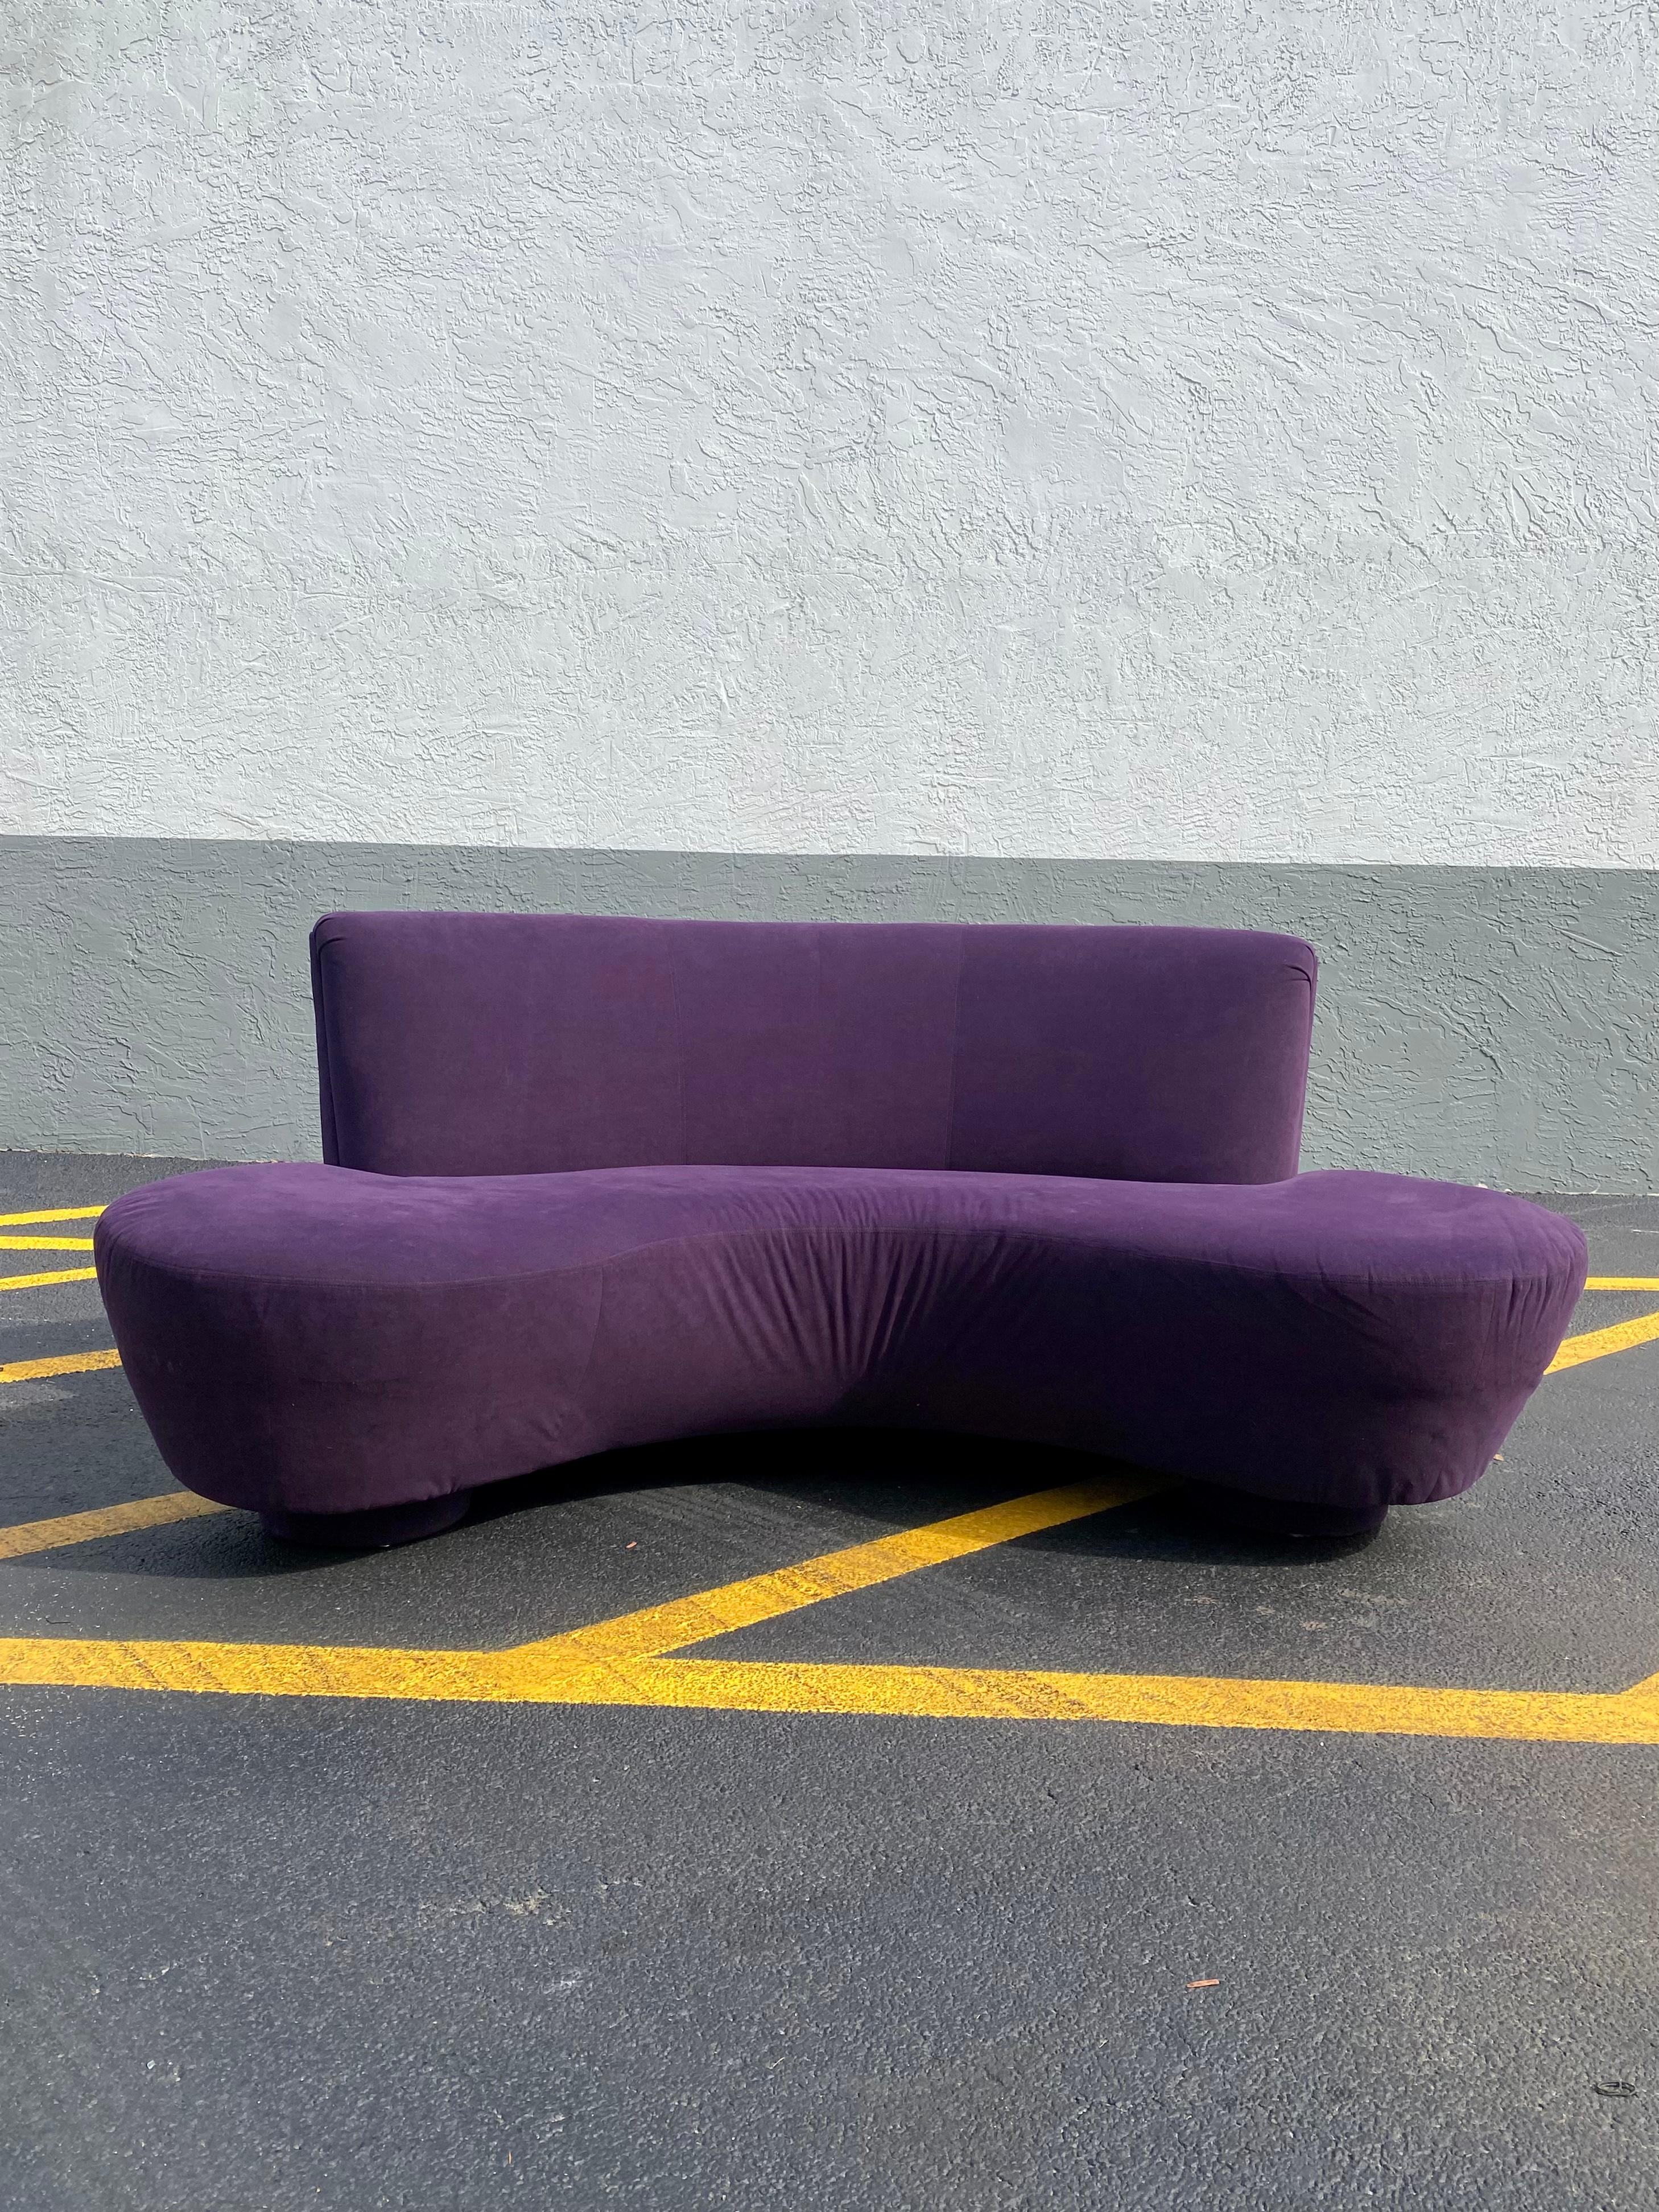 On offer on this occasion is one of the most stunning, purple microfiber cloud sofa you could hope to find. Outstanding design is exhibited throughout. The beautiful sofa is statement piece which is also extremely comfortable and packed with